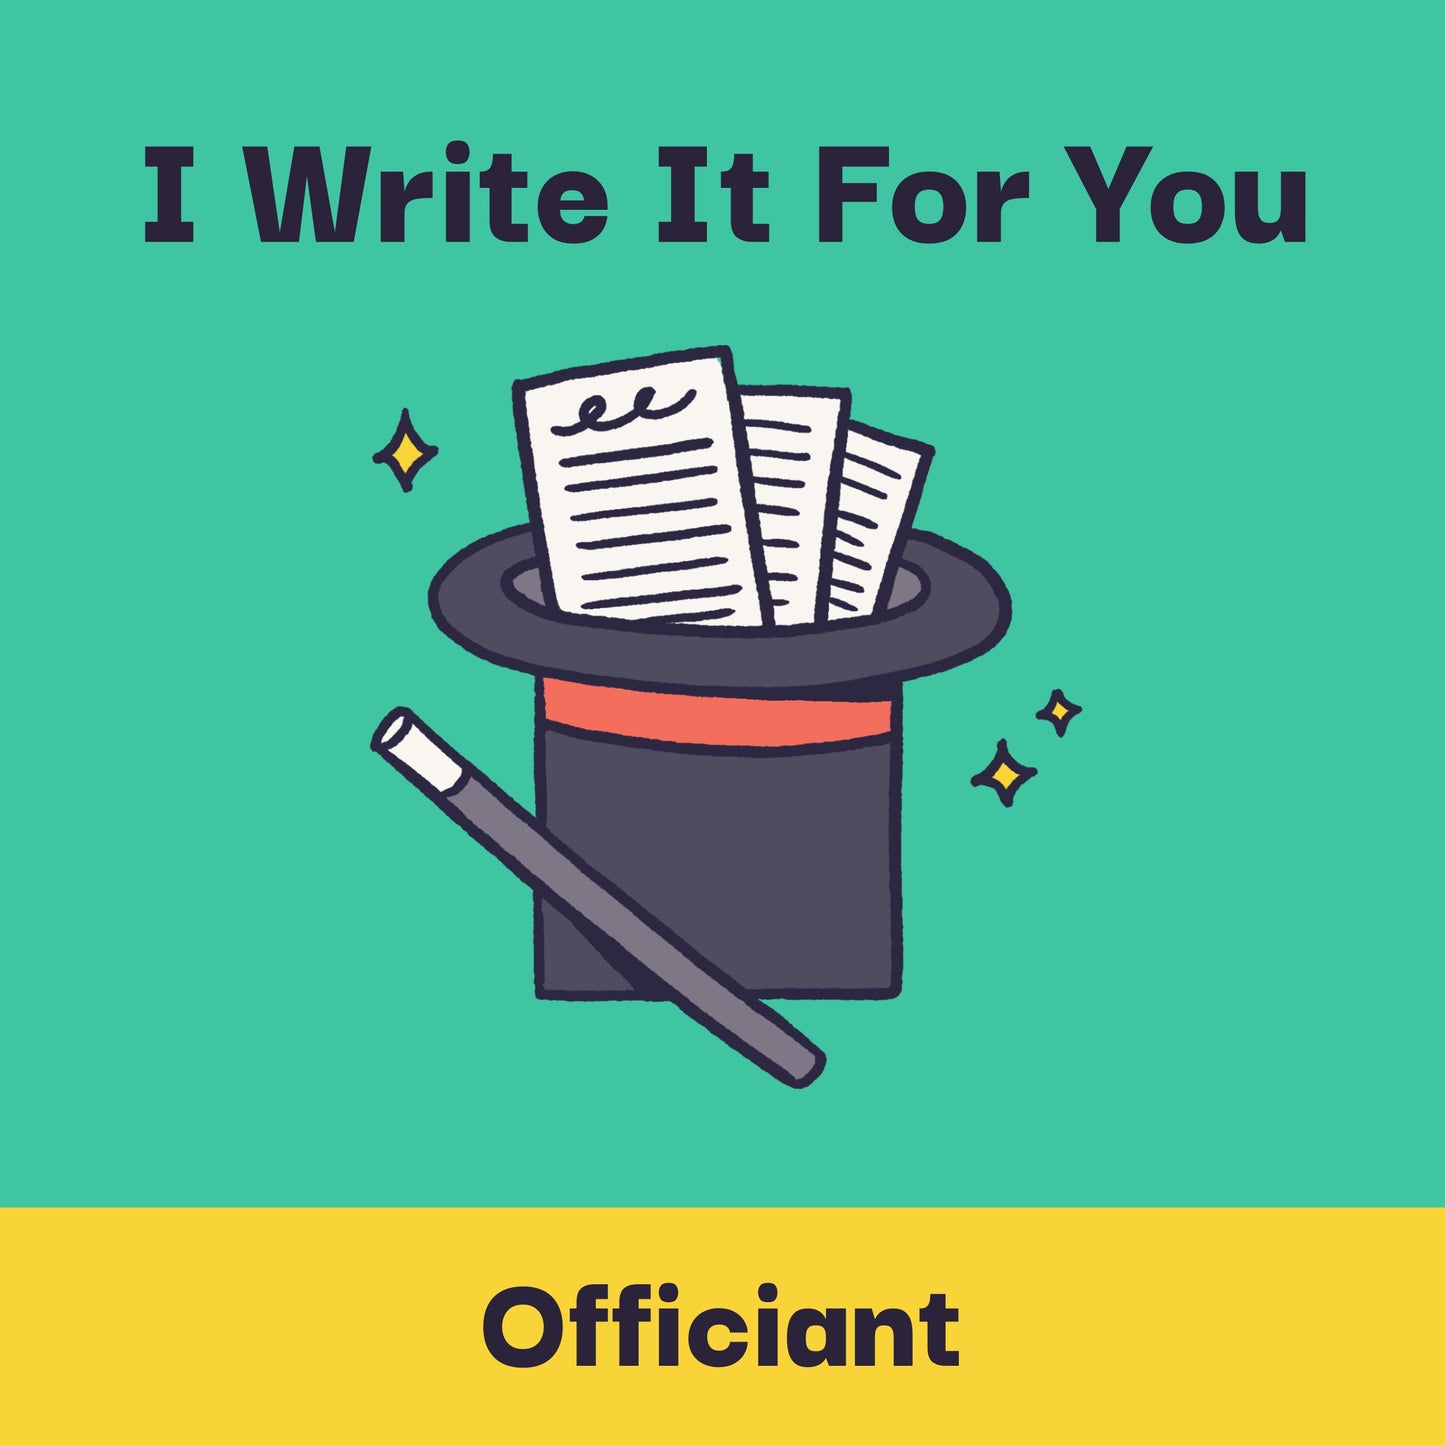 I Write It For You: Officiant